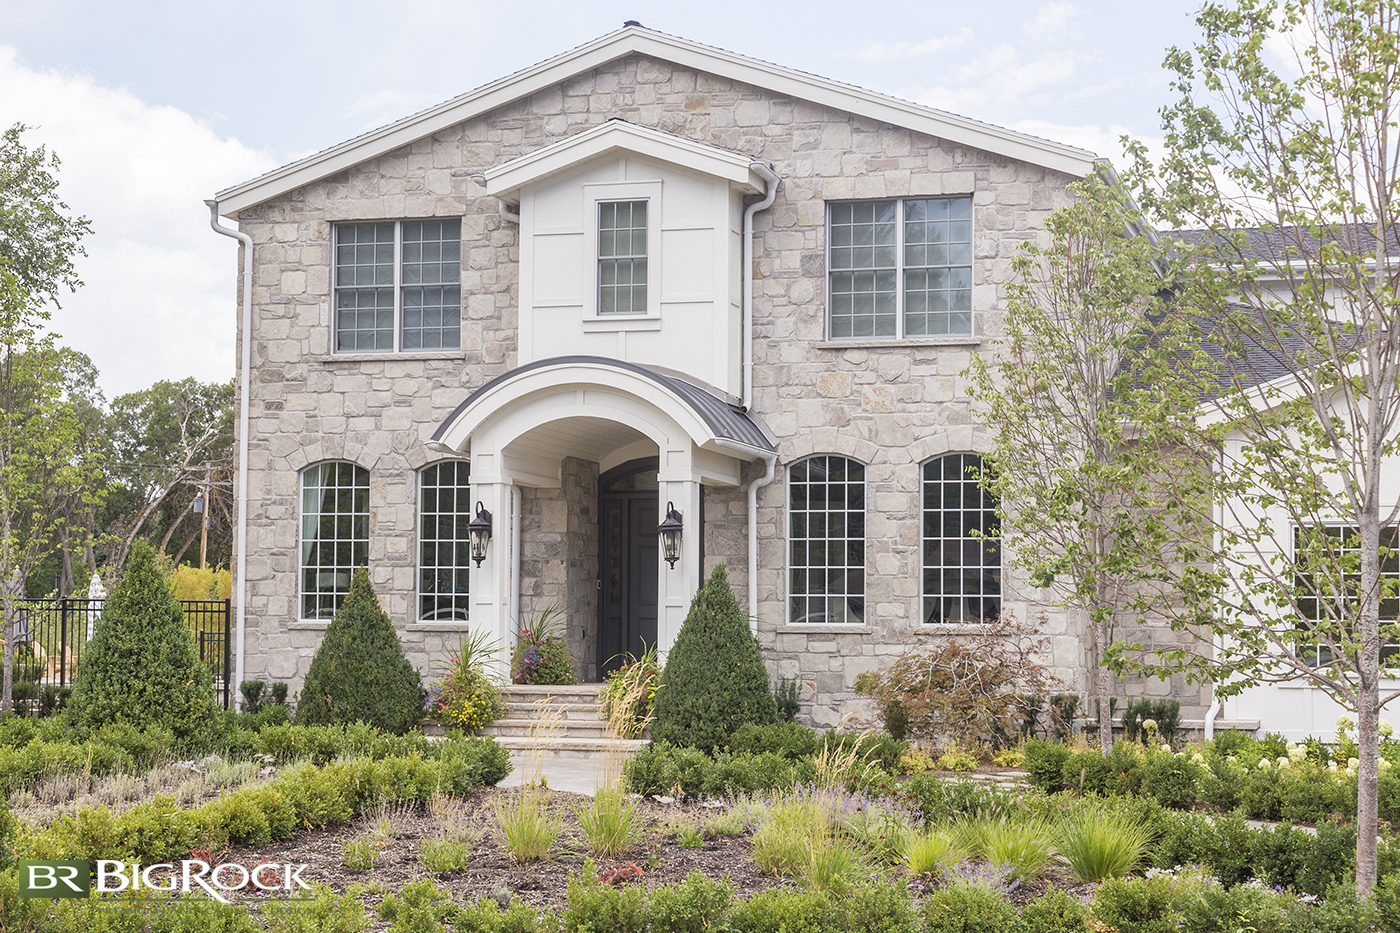 Beautiful two story stone home with a symmetrical xeriscape front yard landscaping with bark and no lawn for easy maintenance.